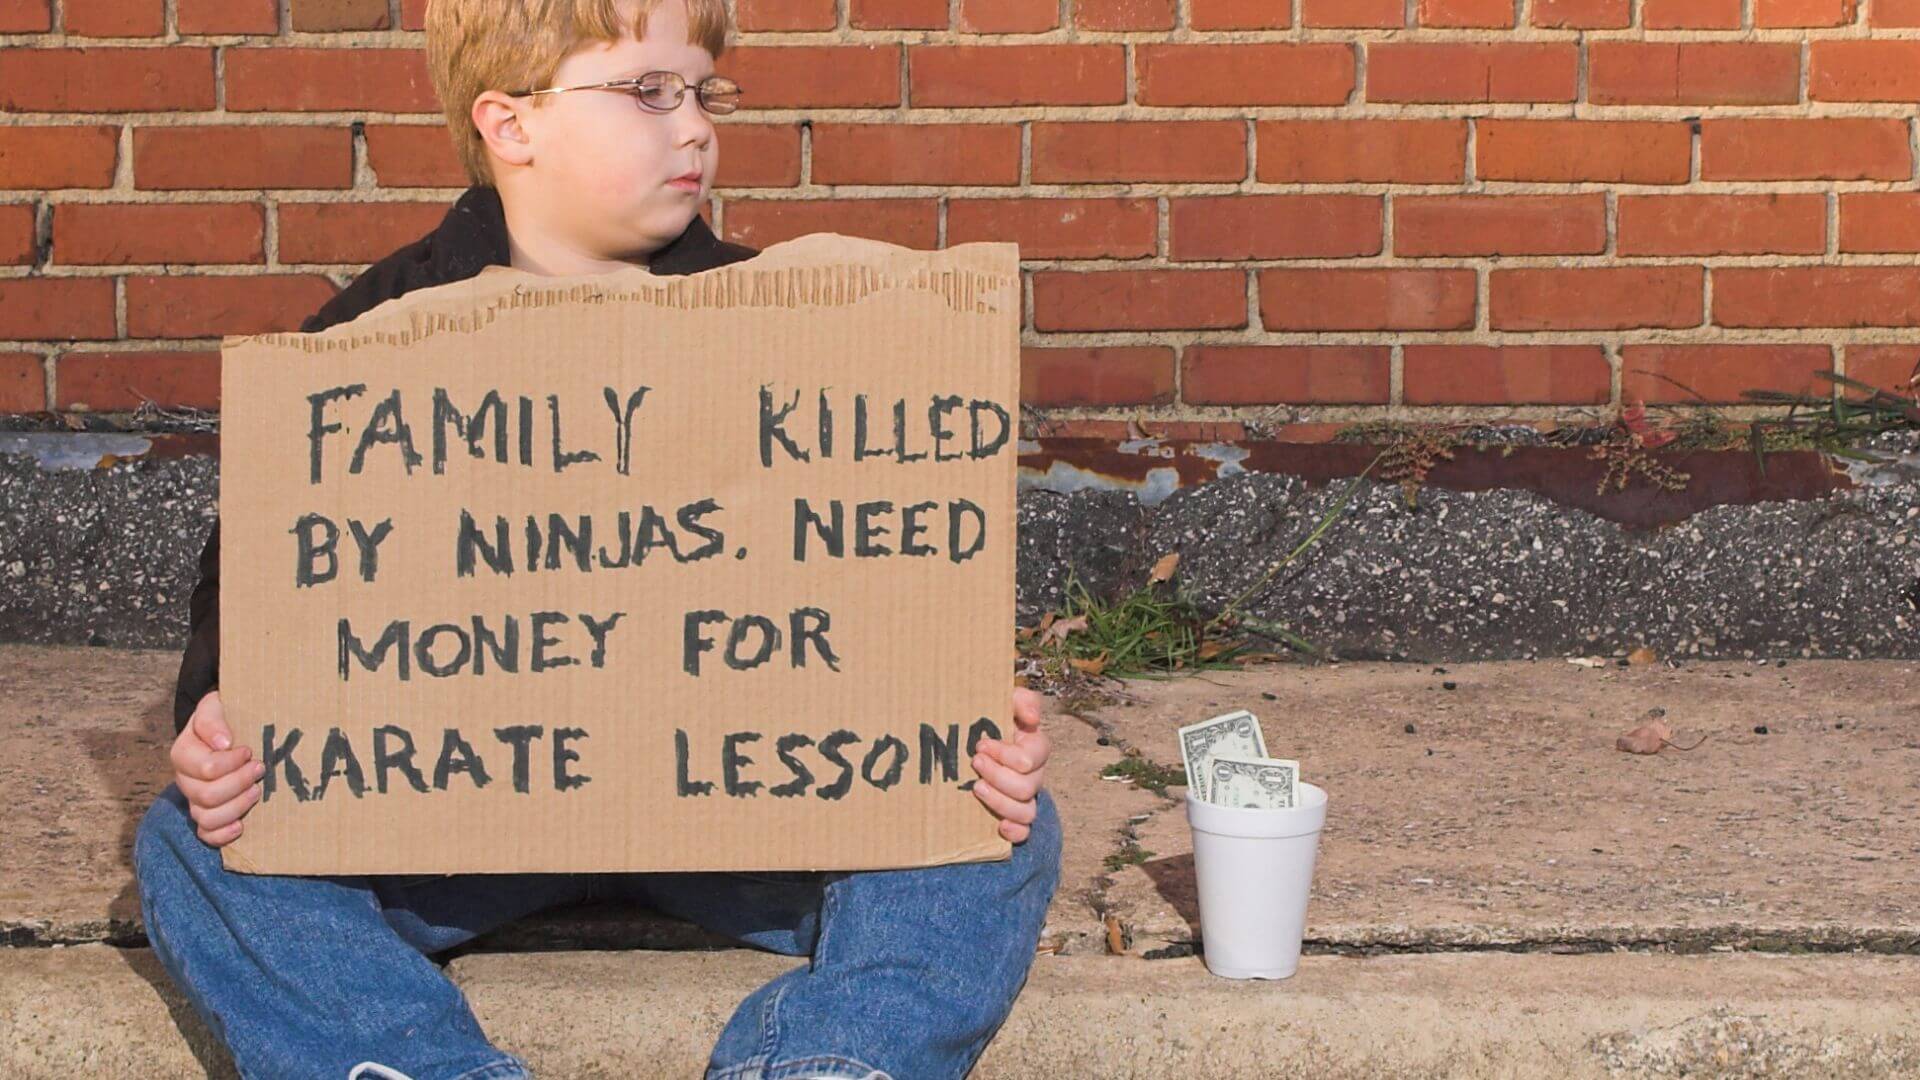 A boy holding a hand-written sign "Family killed by ninjas. Need money for karate lessons"